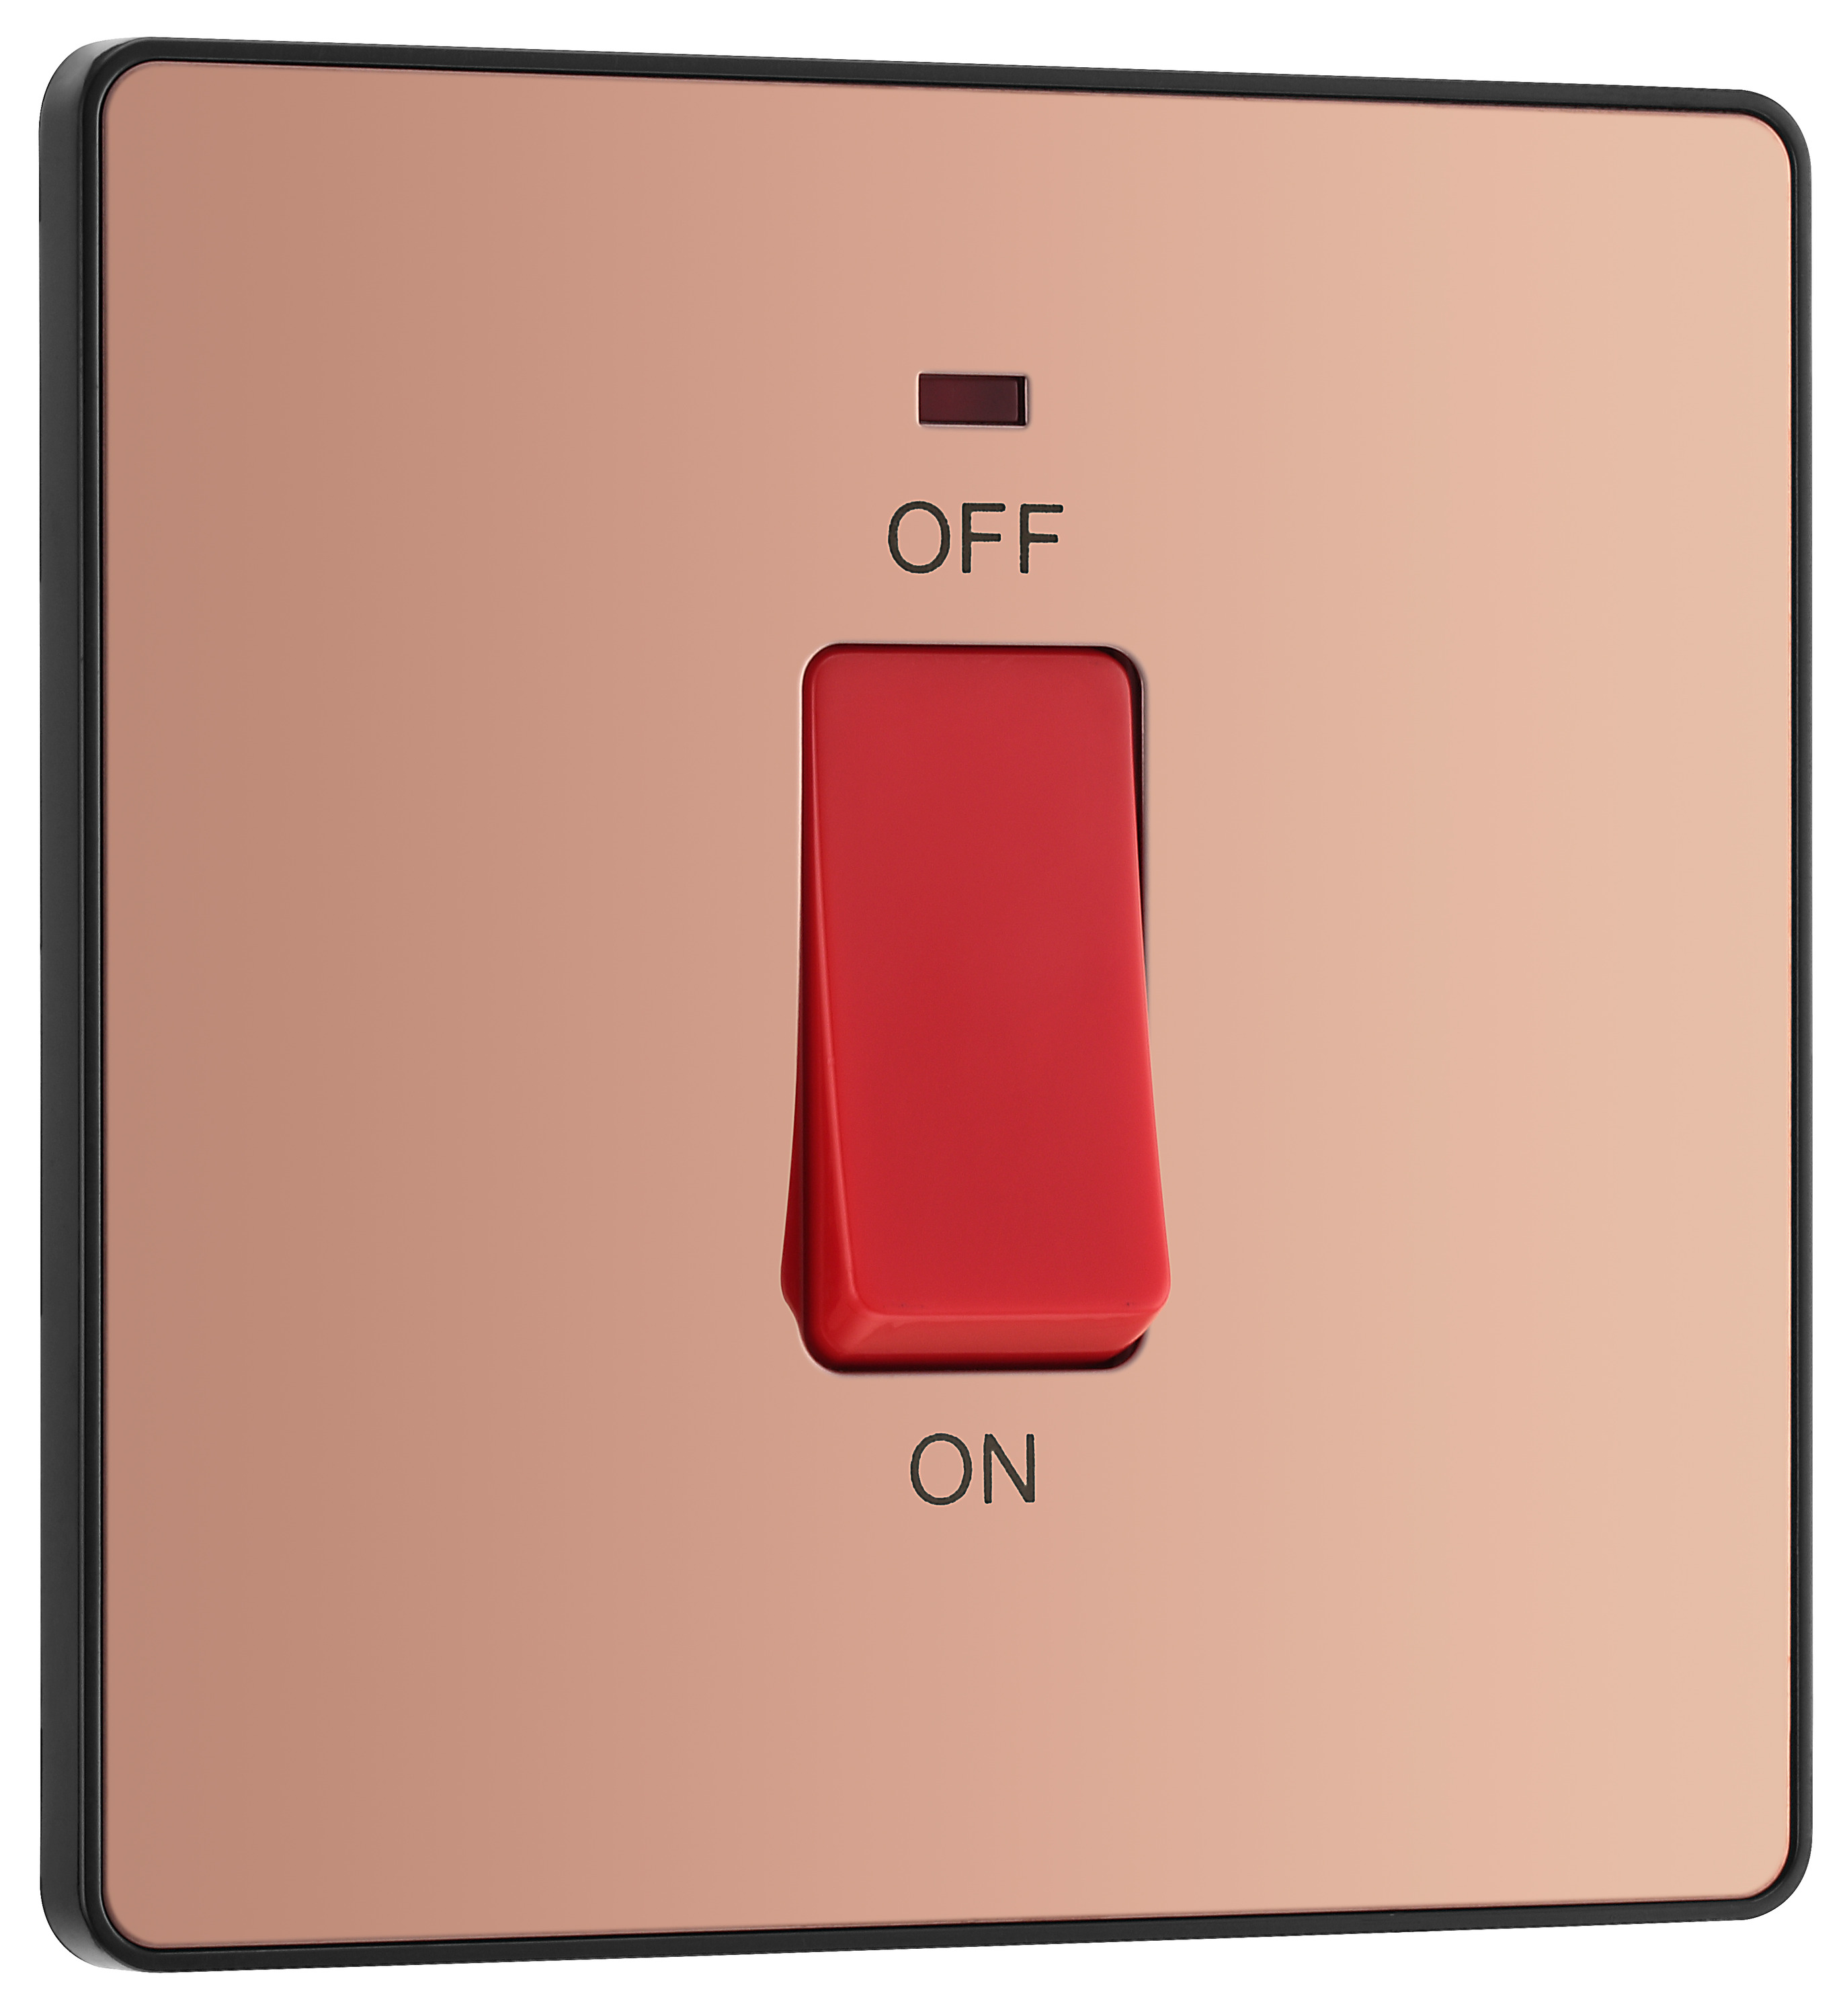 Image of BG Evolve Polished Copper 45A Square Double Pole Switch with Led Power Indicator